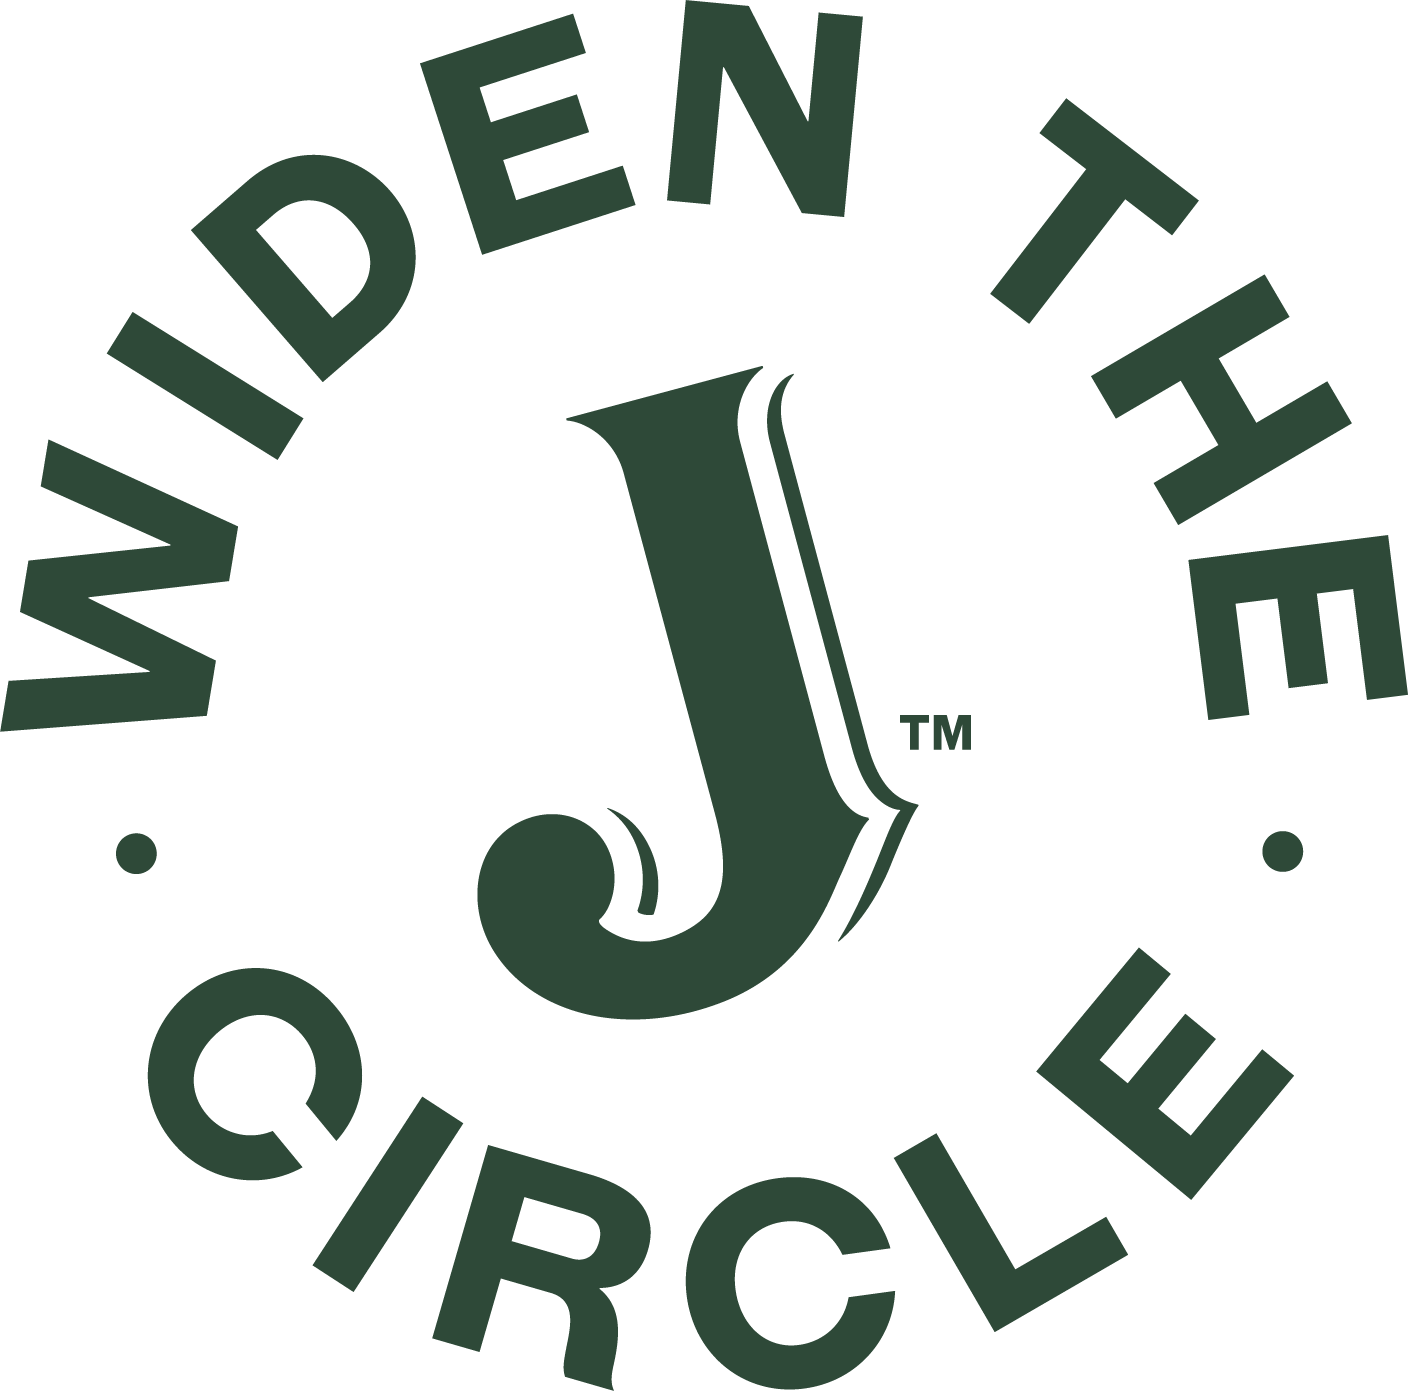 Jameson Irish Whiskey launches ‘Widen the Circle’ global brand campaign